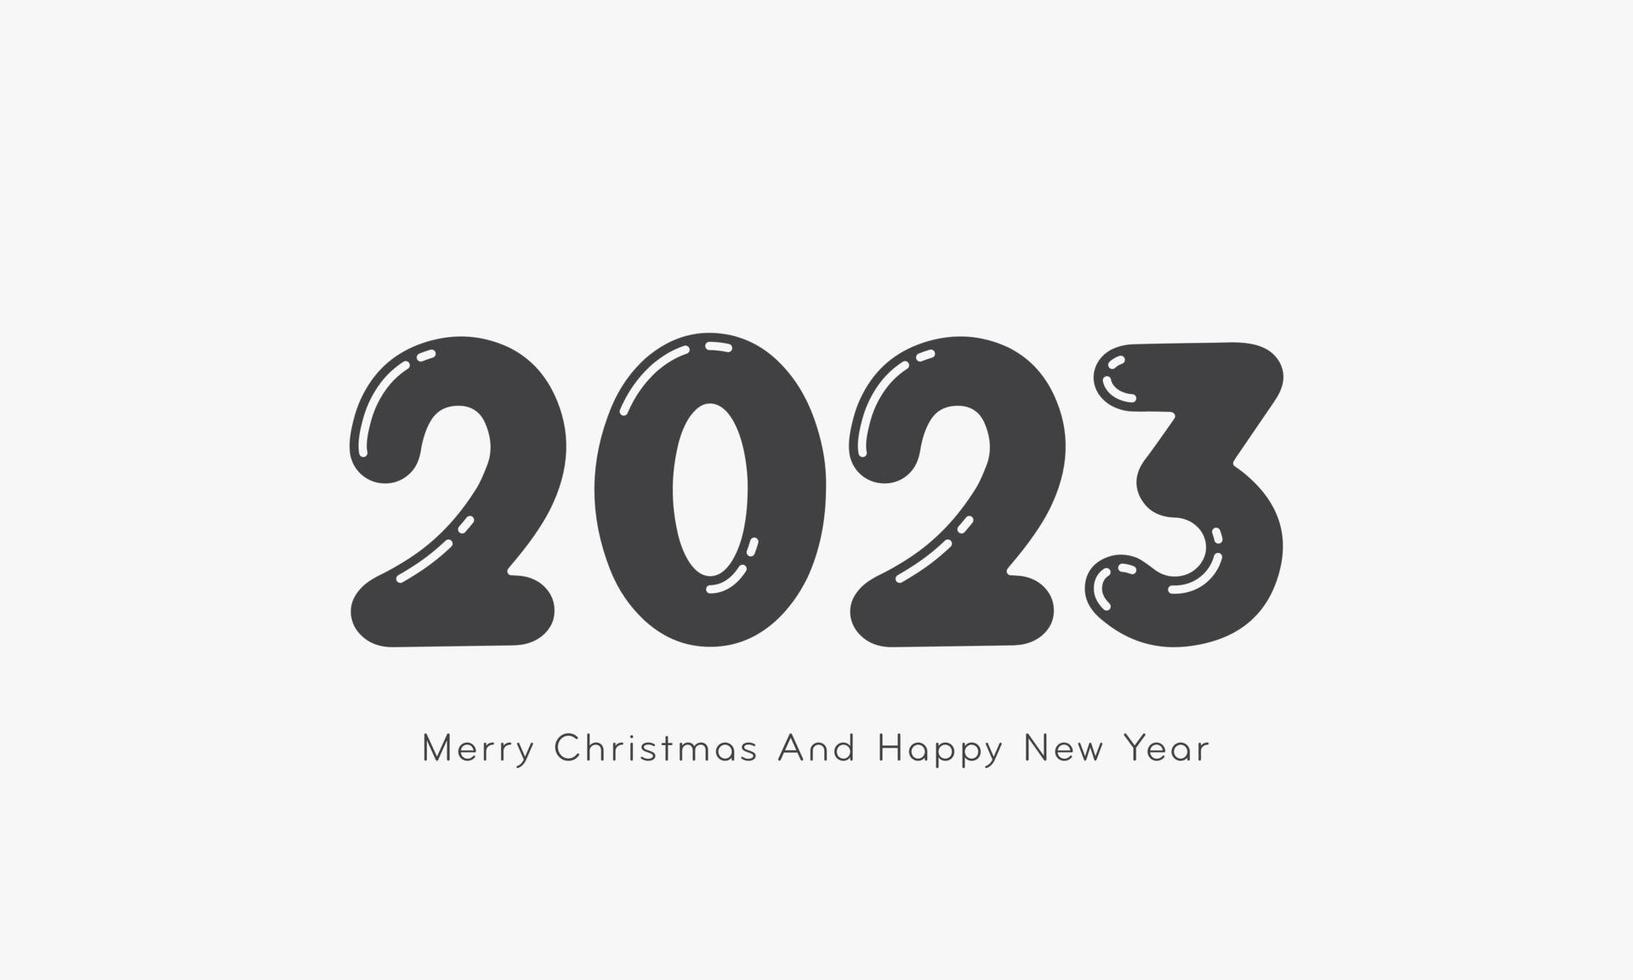 2023 with text happy and new year christmas design vector illustration.